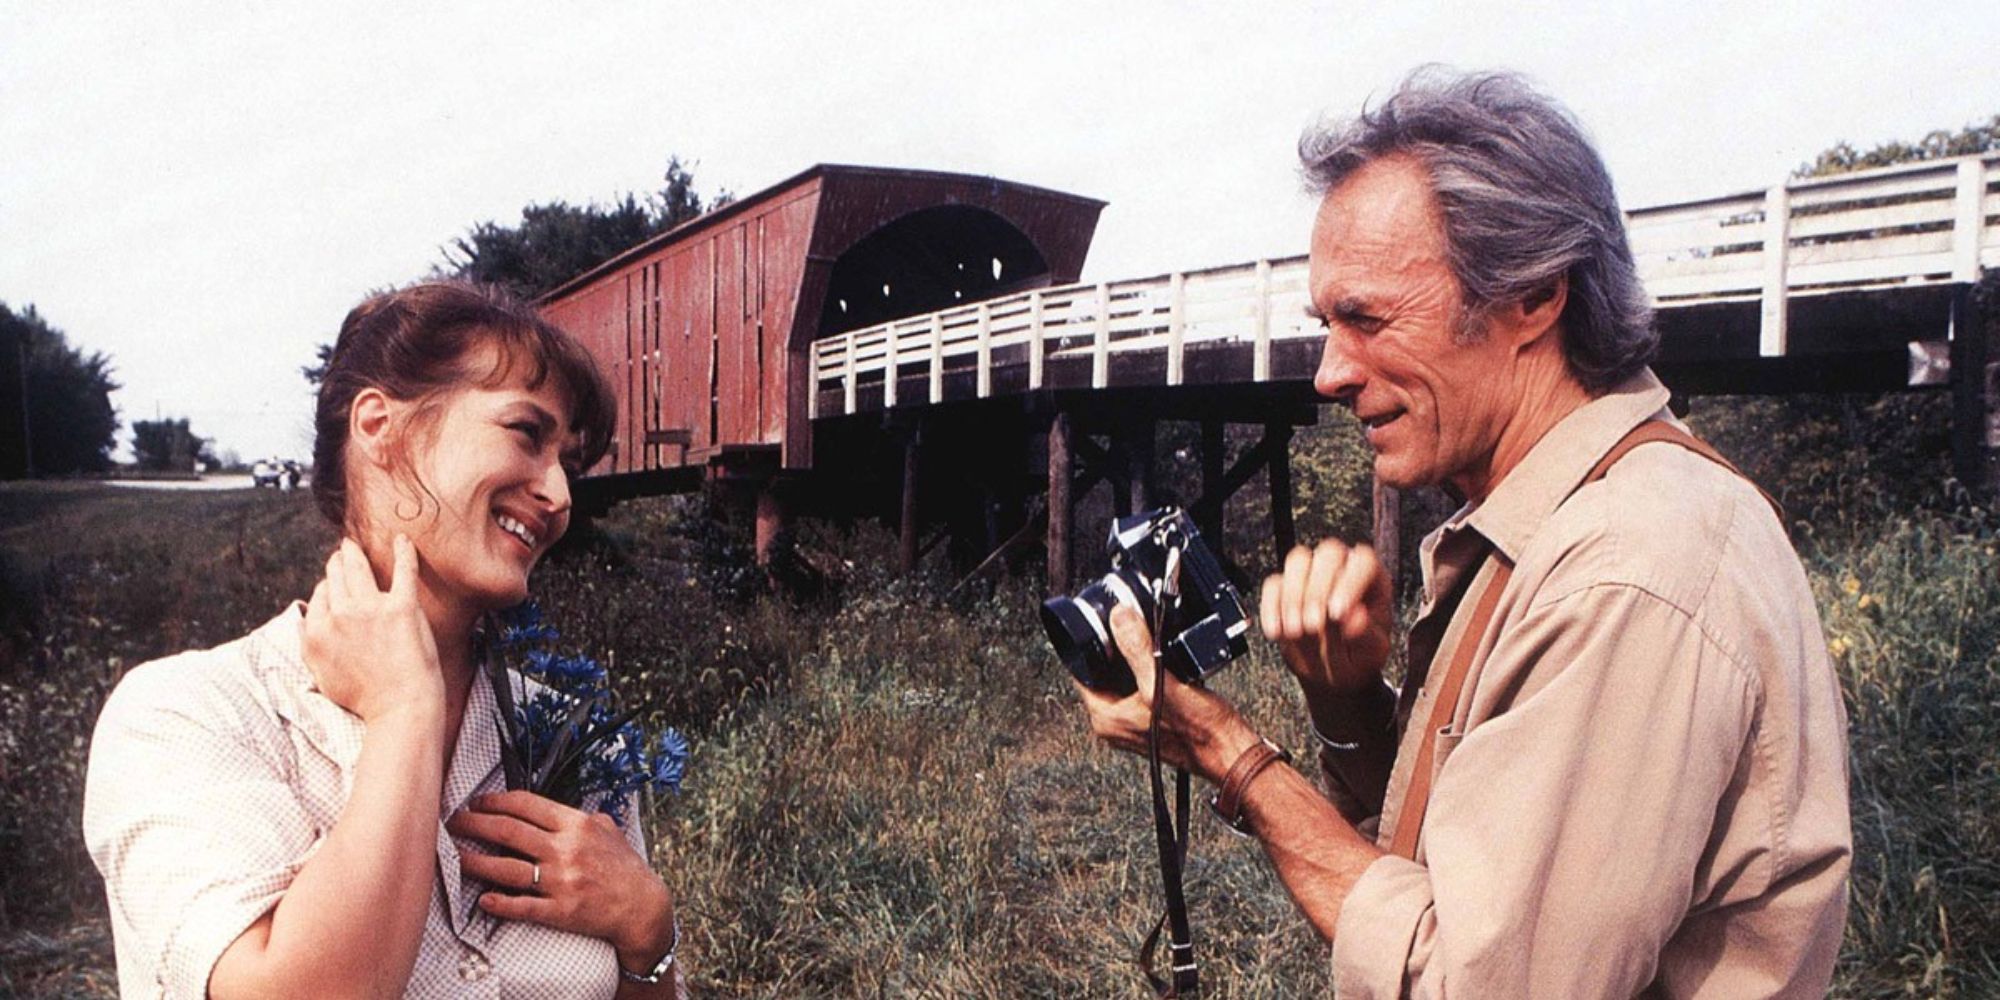 Clint Eastwood’s 10 Most Popular Movies, According to Letterboxd